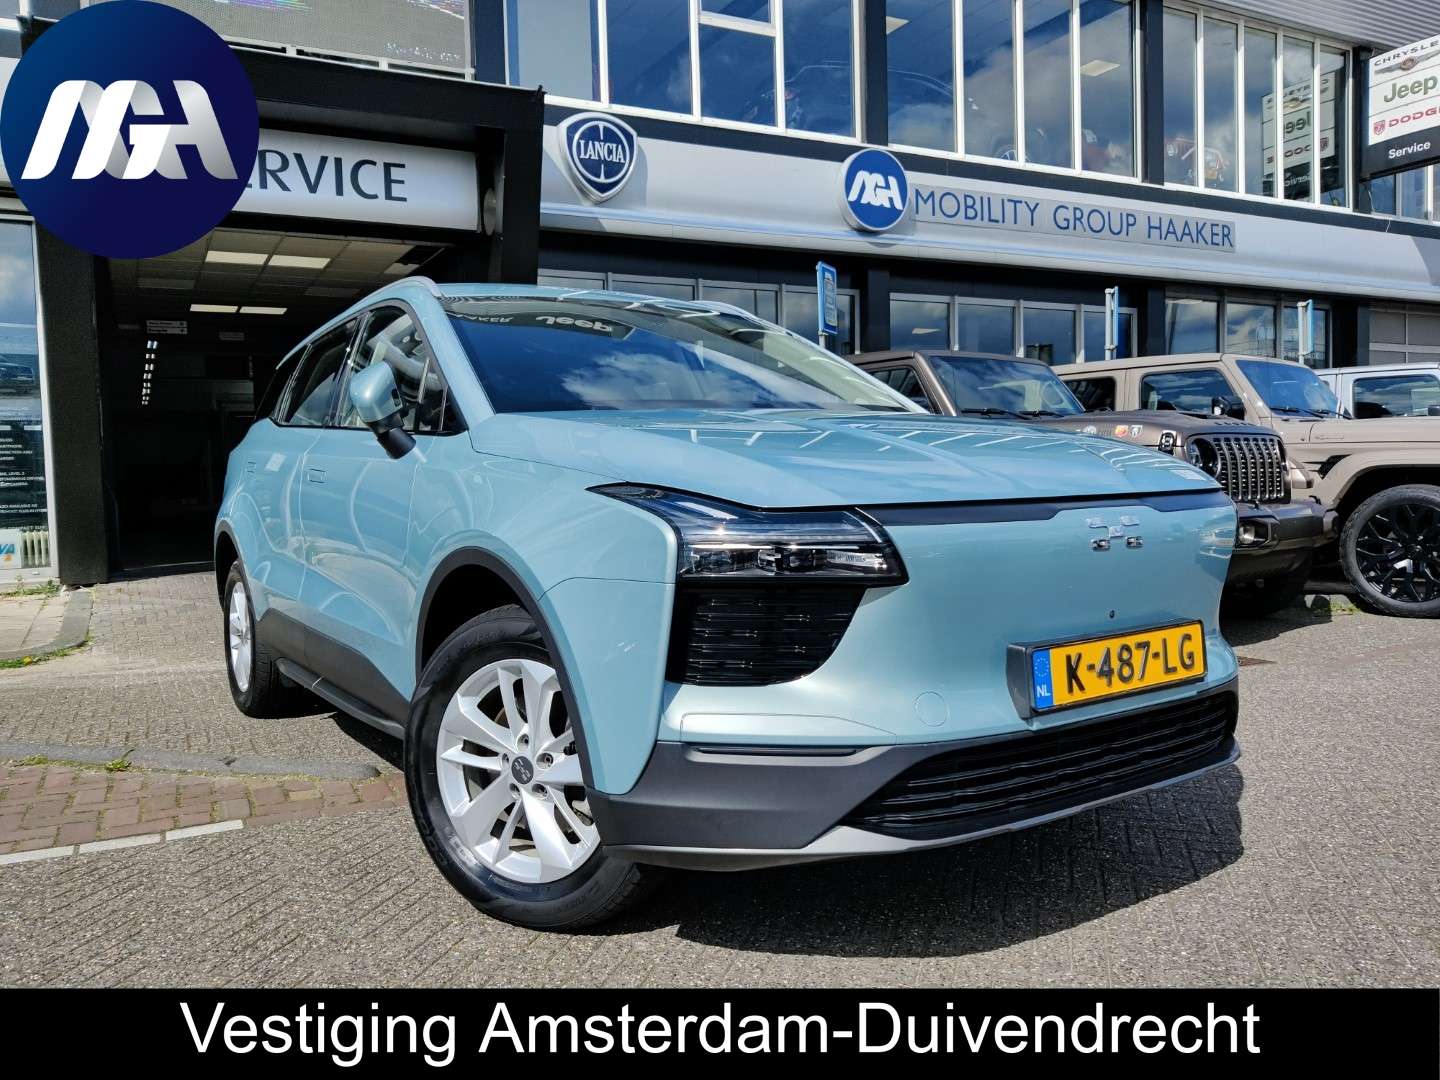 Aiways U5 Off-Road/Pick-up in Blue used in HEEMSTEDE for € 32,450.-